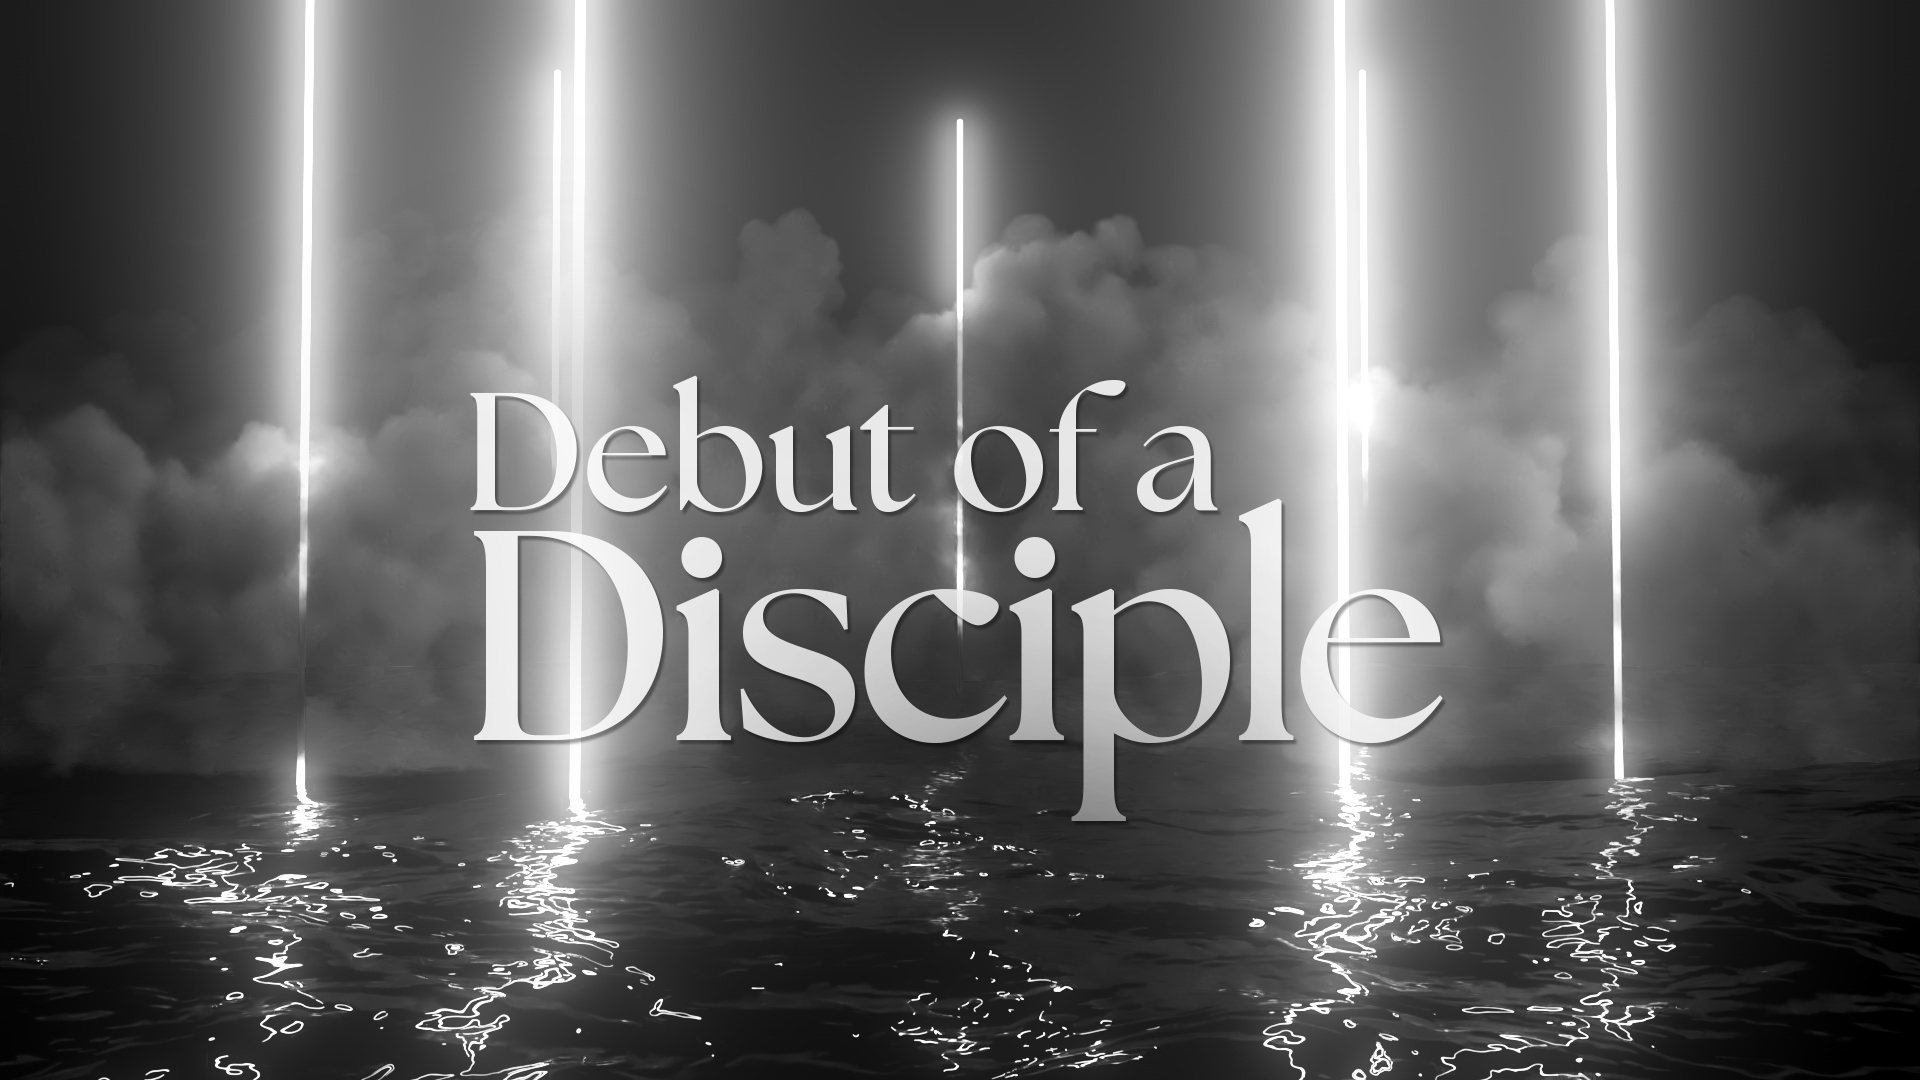 Debut of a Disciple